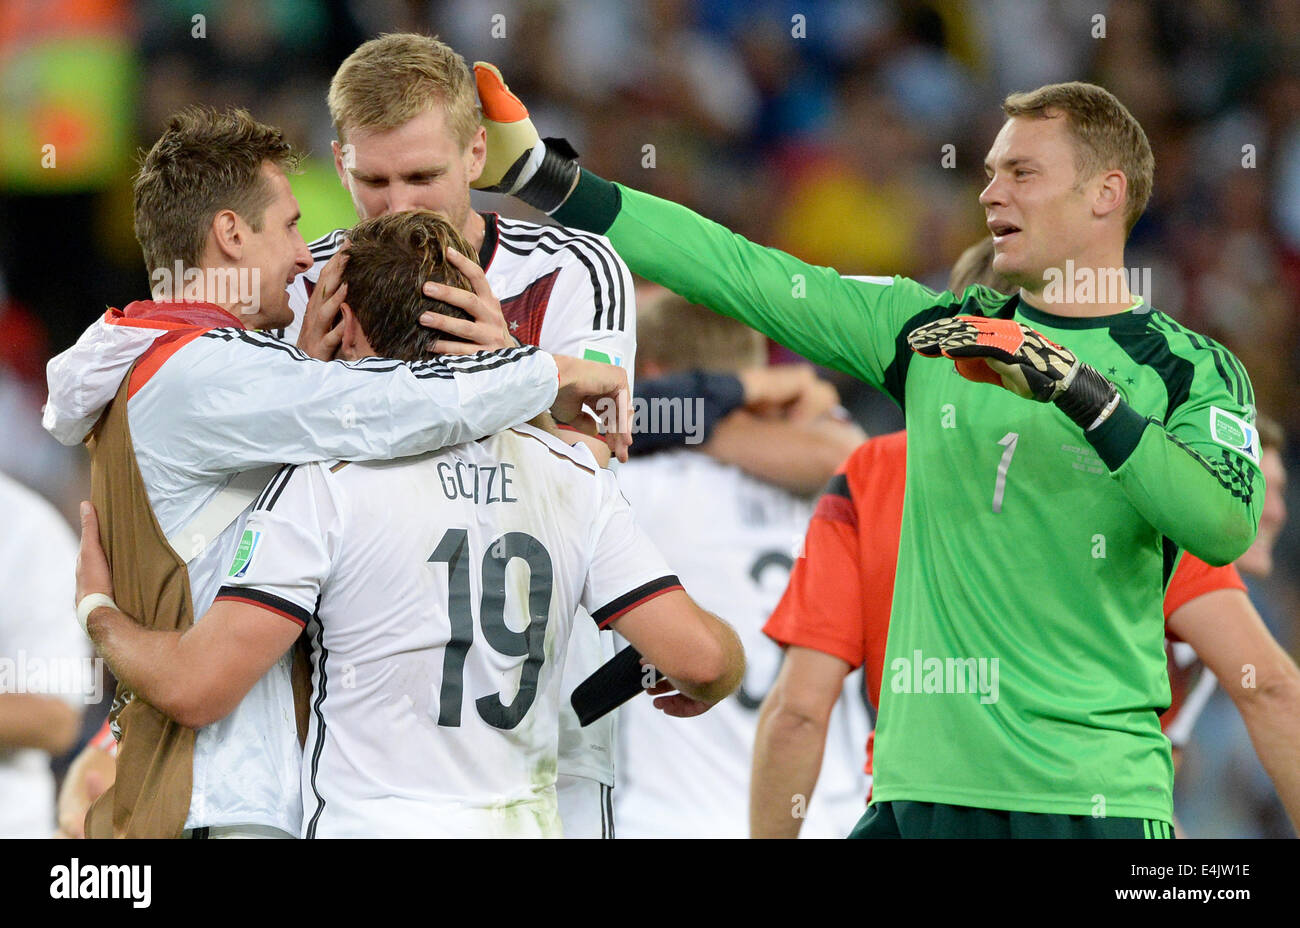 Rio de Janeiro, Brazil. 13th July, 2014. Miroslav Klose (L-R), Mario Goetze, Per Mertesacker and goalkeeper Manuel Neuer of Germany celebrate after winning the FIFA World Cup 2014 final soccer match between Germany and Argentina at the Estadio do Maracana in Rio de Janeiro, Brazil, 13 July 2014. Photo: Marcus Brandt/dpa/Alamy Live News Stock Photo